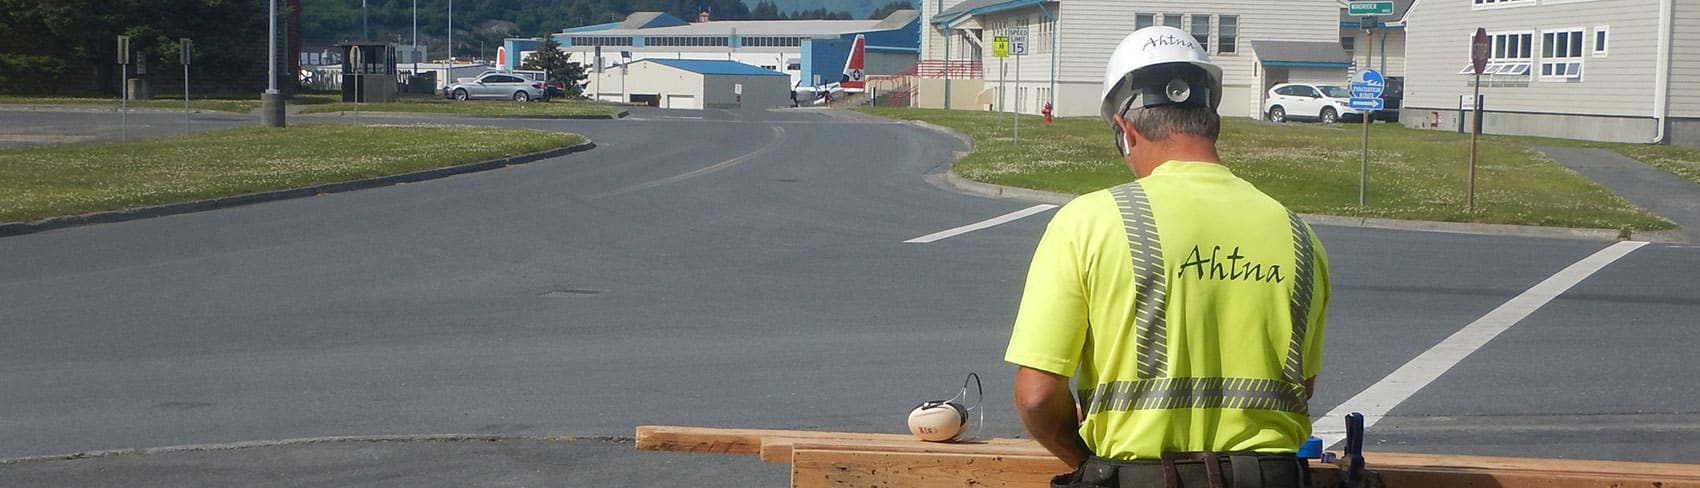 Ahtna construction worker cuts boards outside job site.